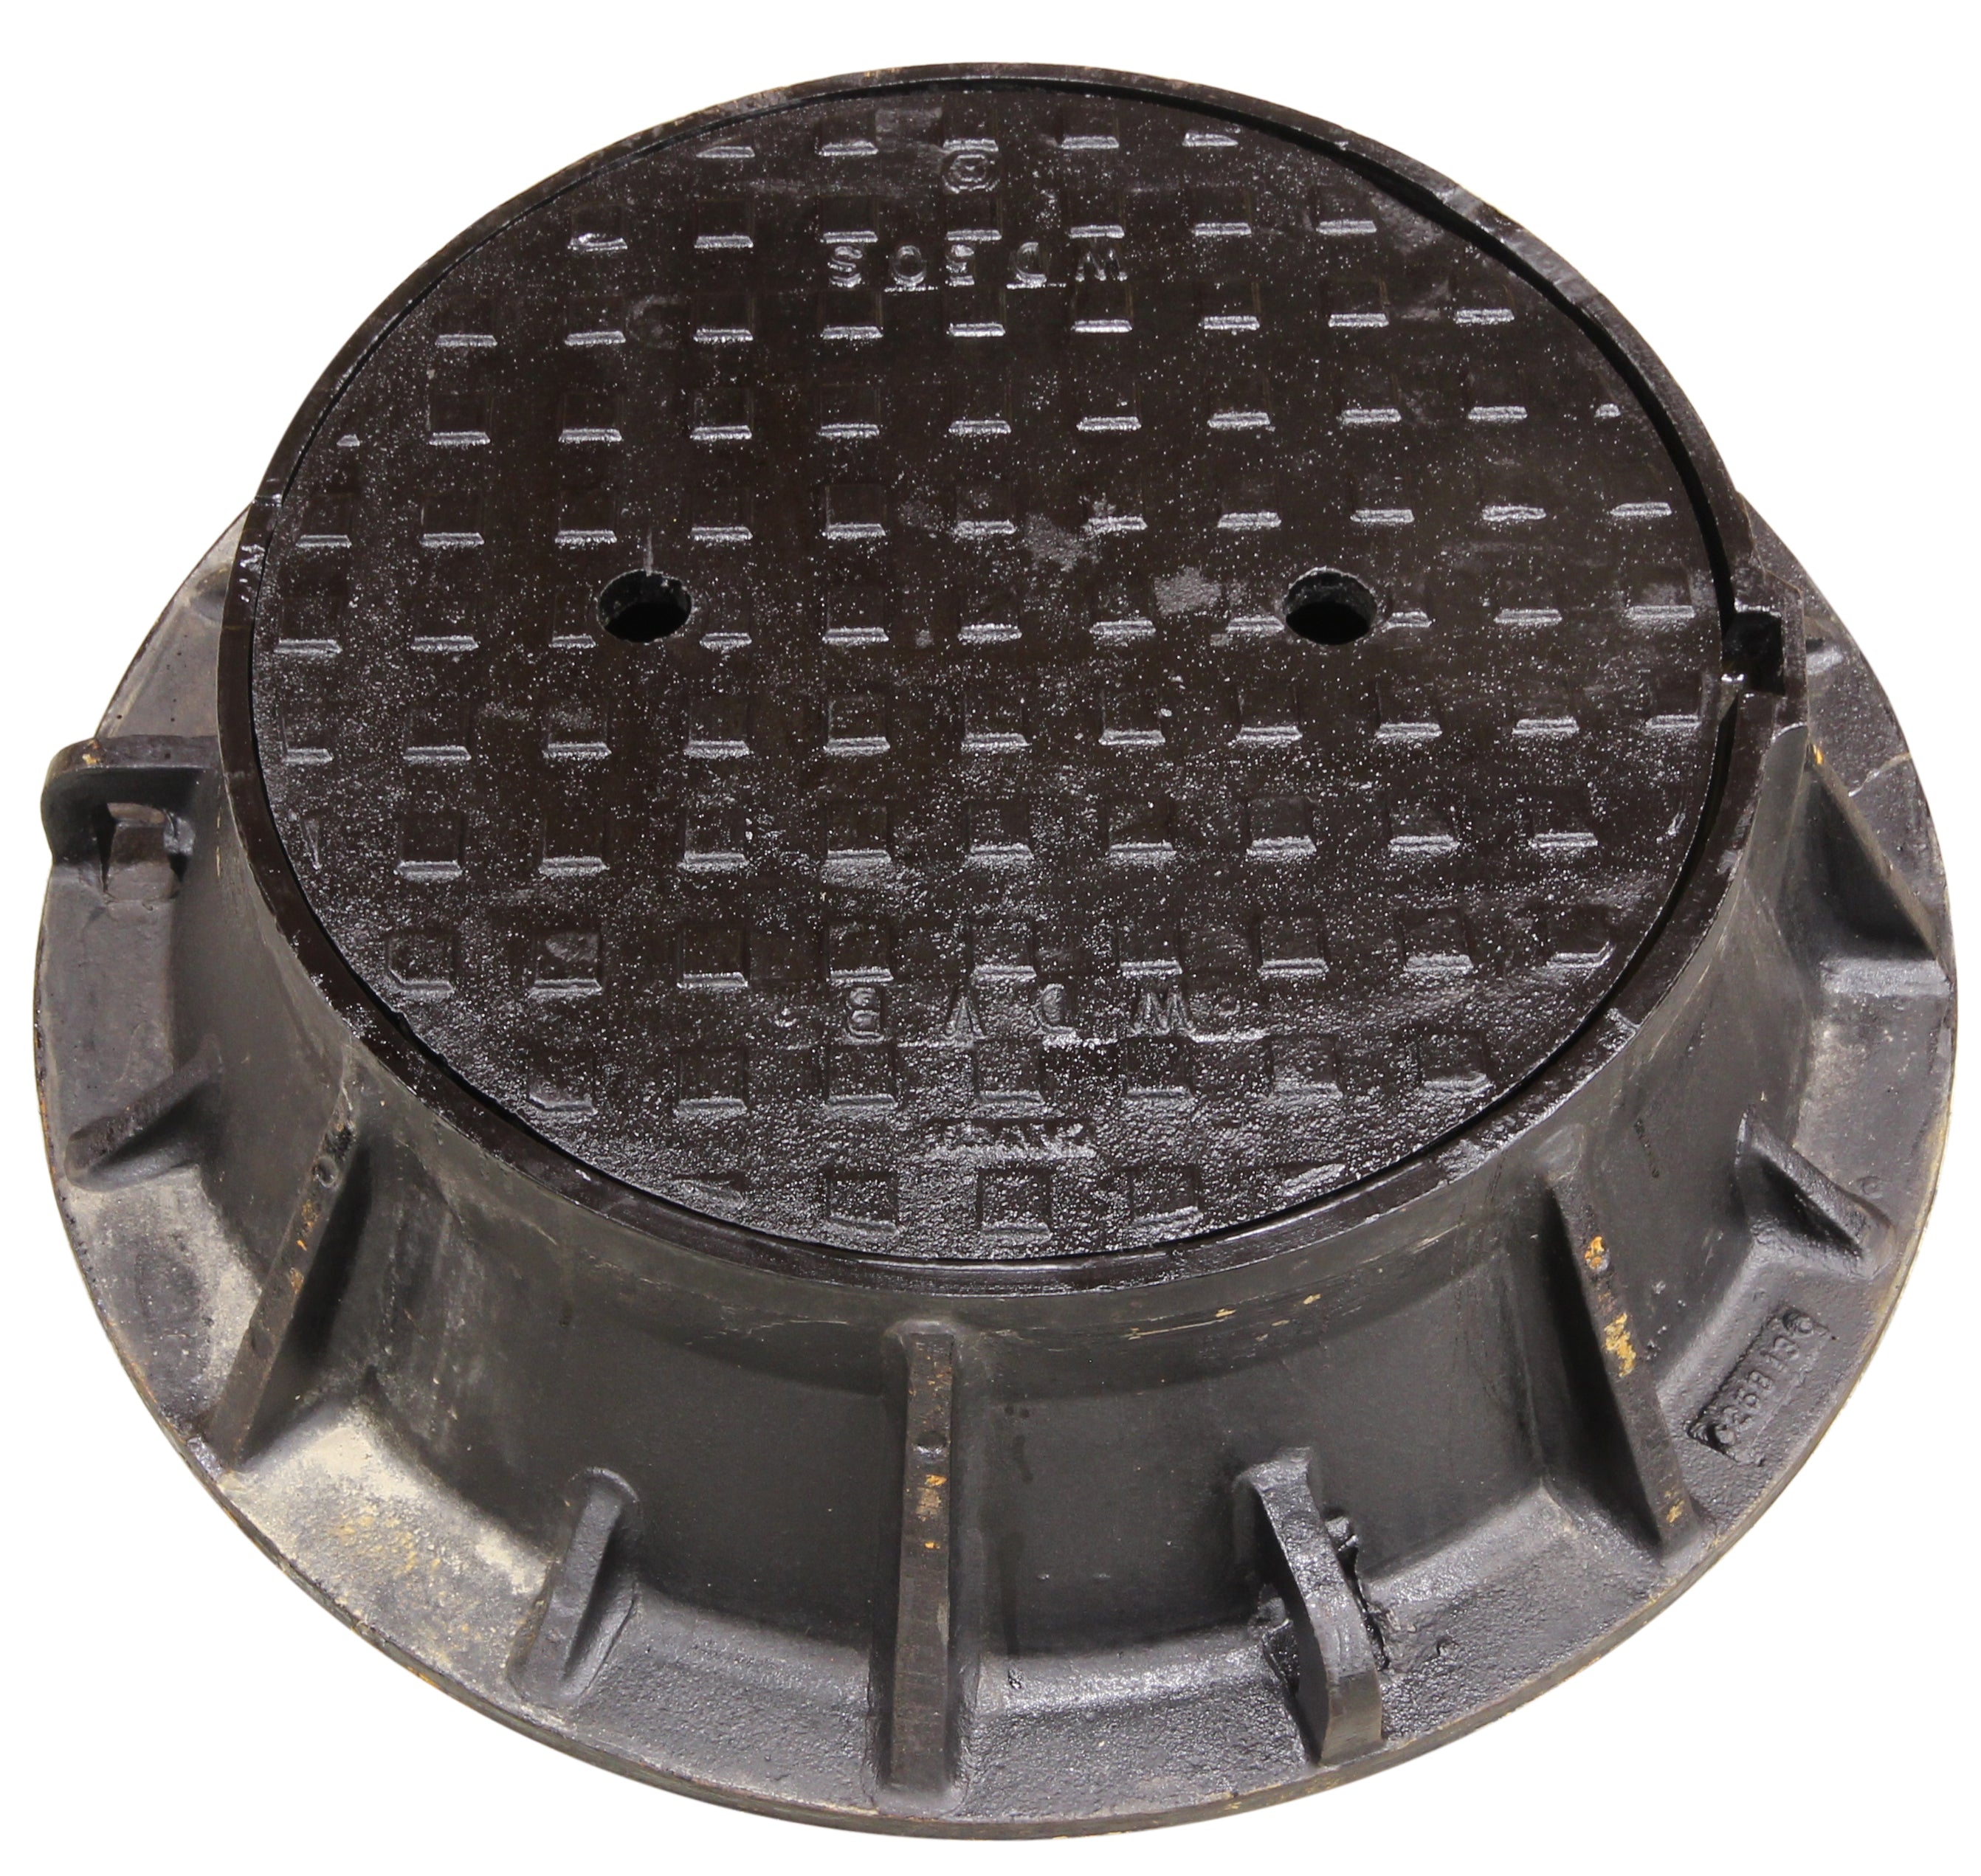 Standard Cast Manhole Frames & Covers - City of Winnipeg Style Waterworks Products - Cleanflow